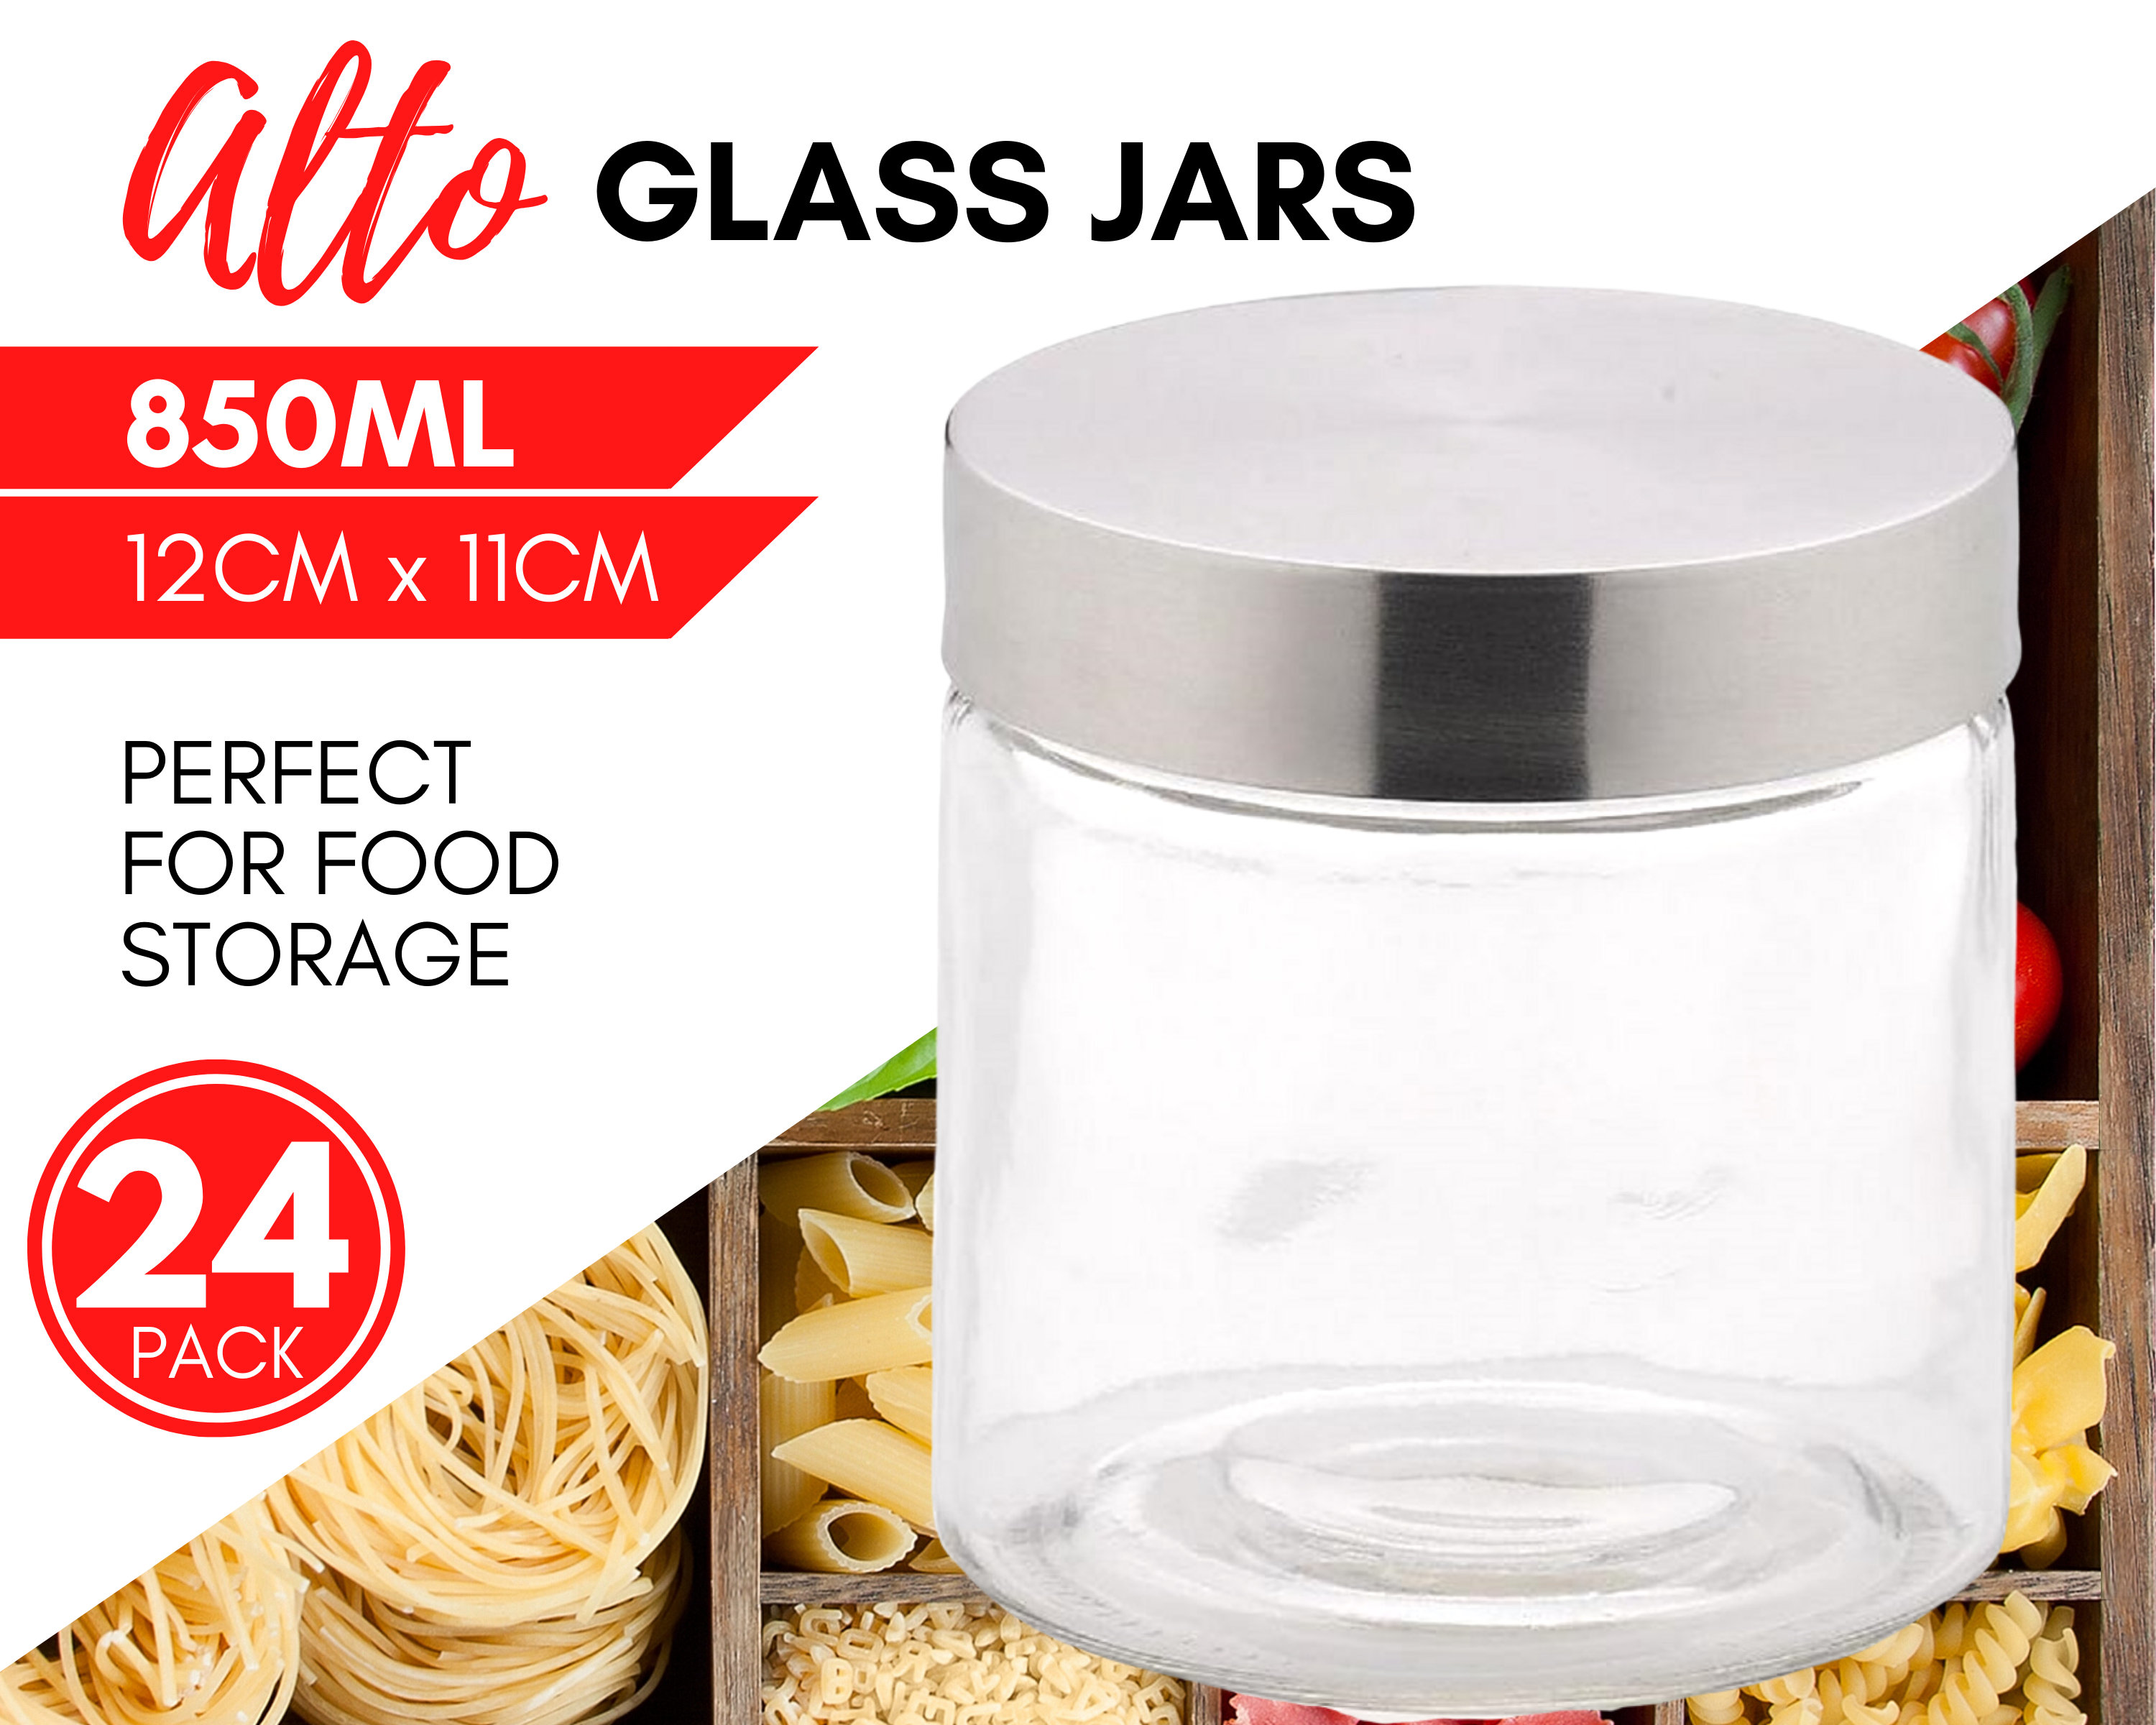 6 X ASCOT Glass Airtight Food Storage Jars With Screw Top Black Metal Lid  2900ml Vintage Home Kitchen Food Storage Containers Canister Set 